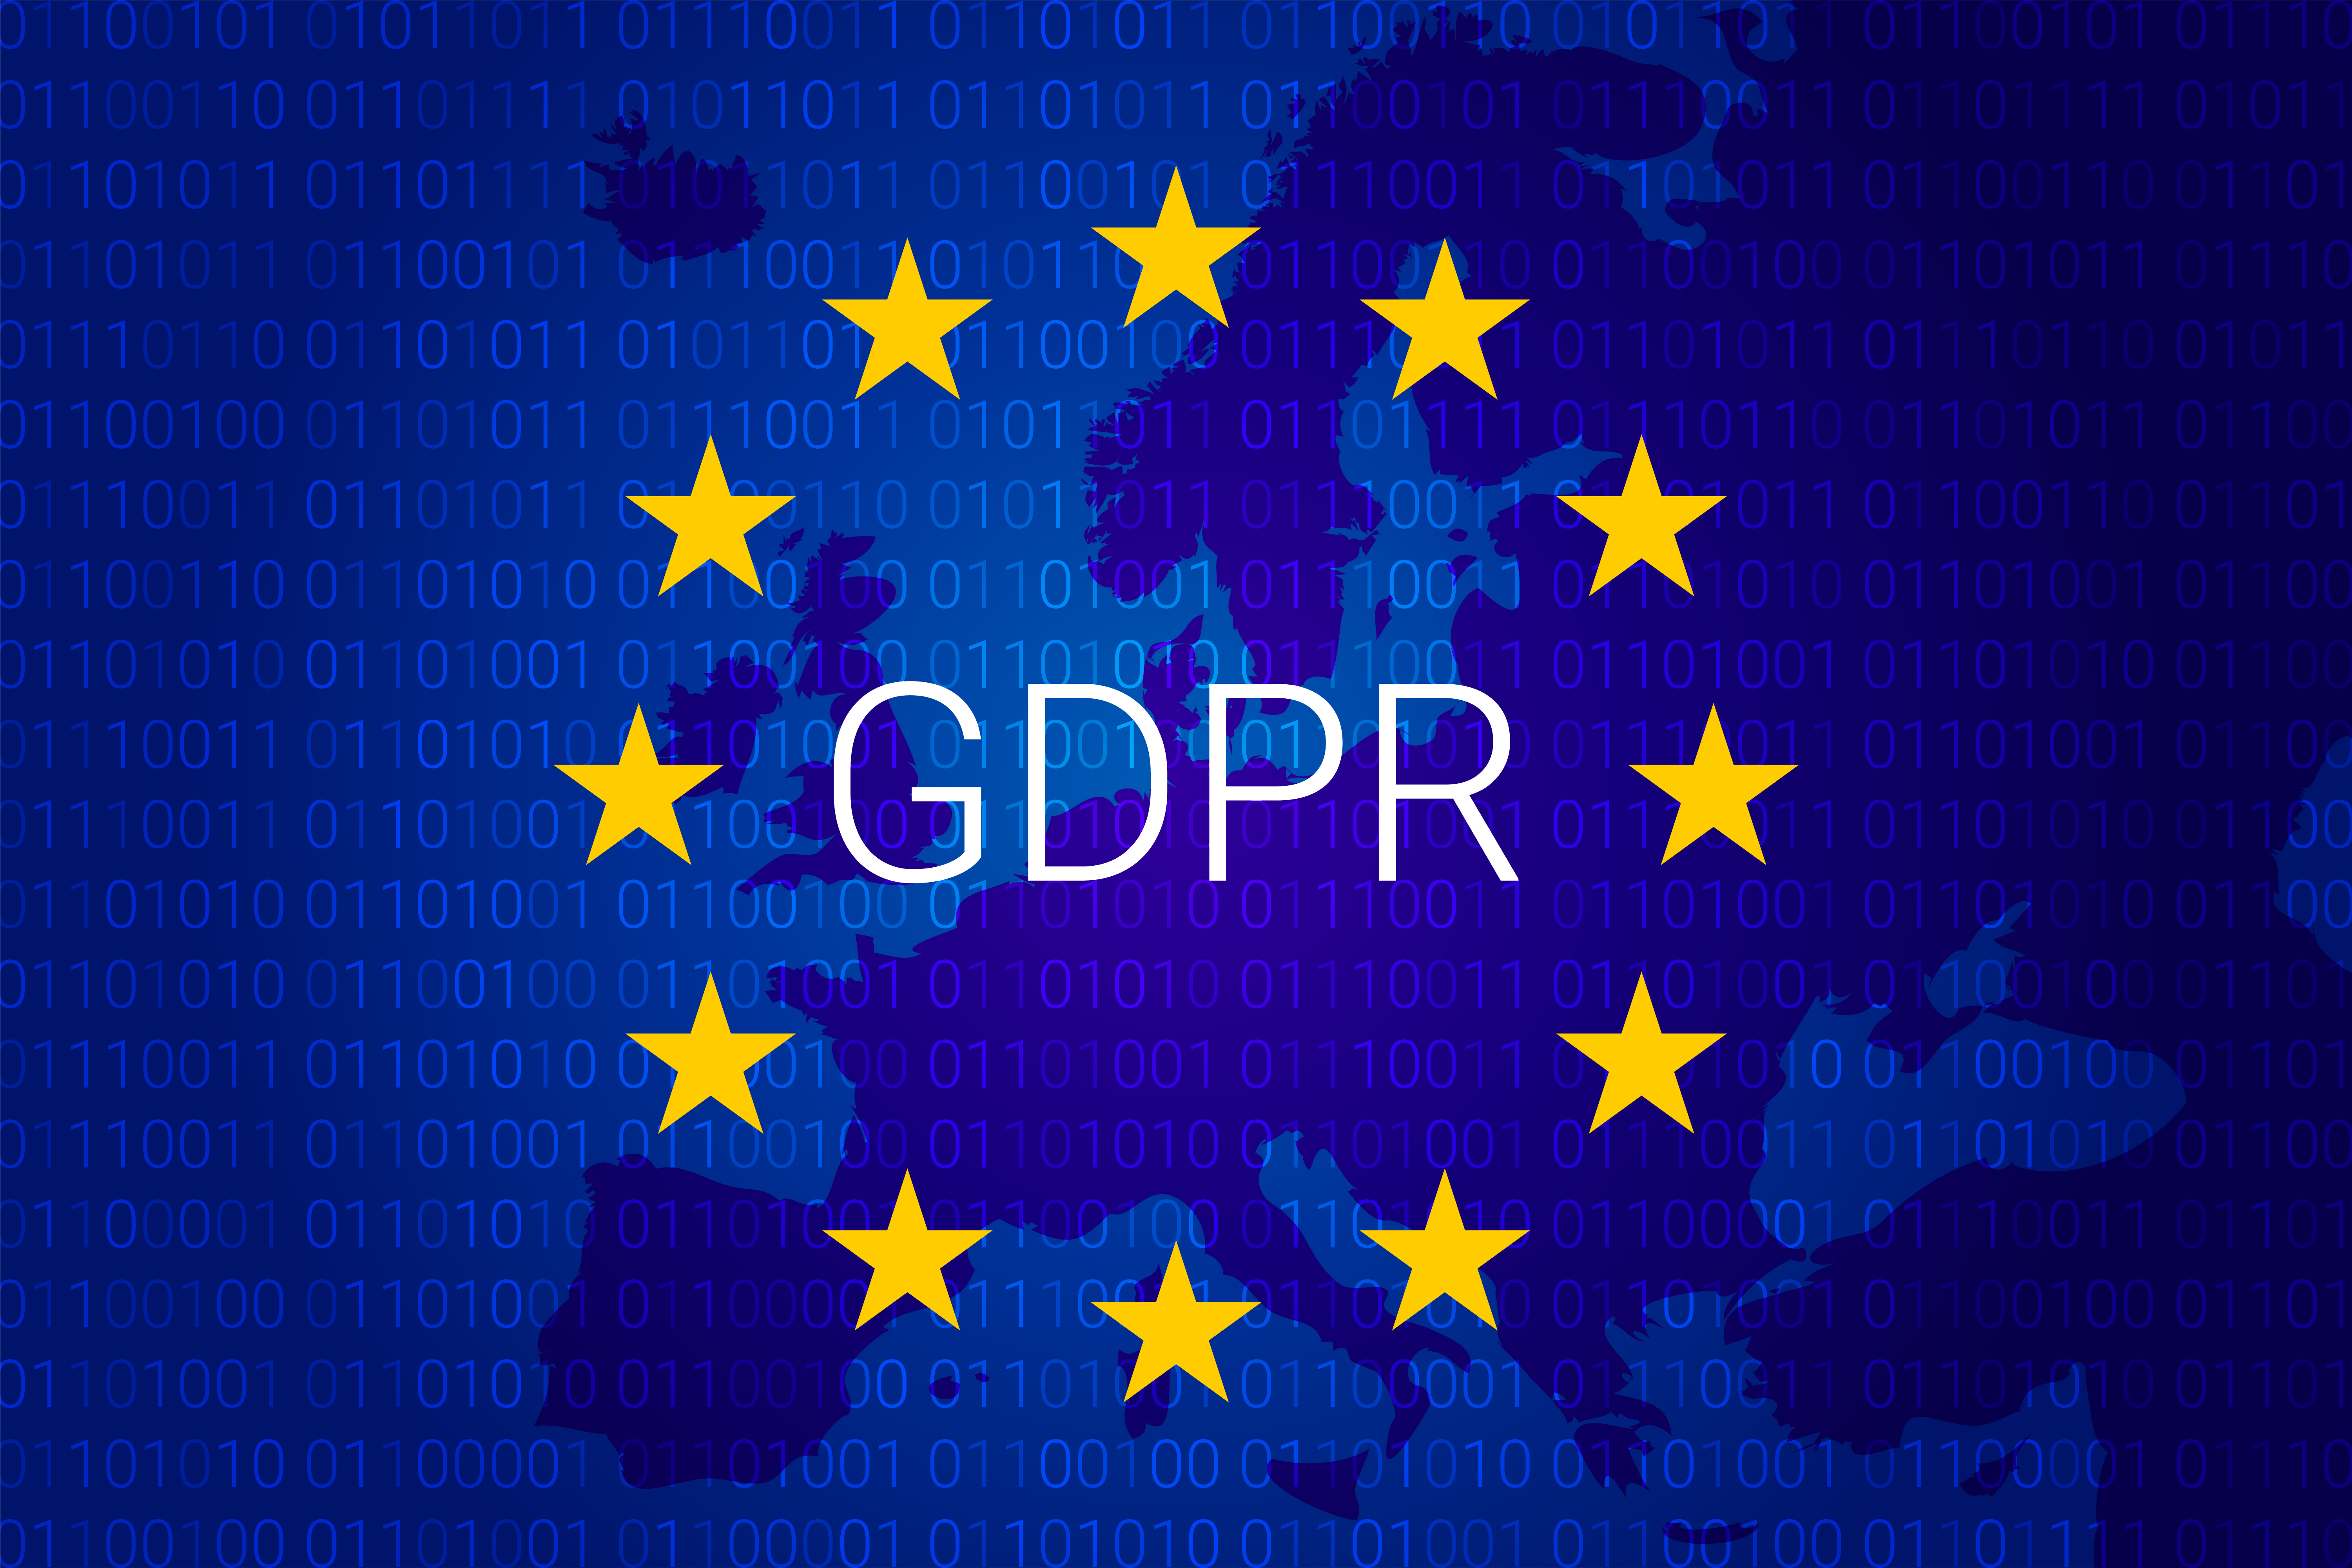 30% of businesses are still not compliant with GDPR